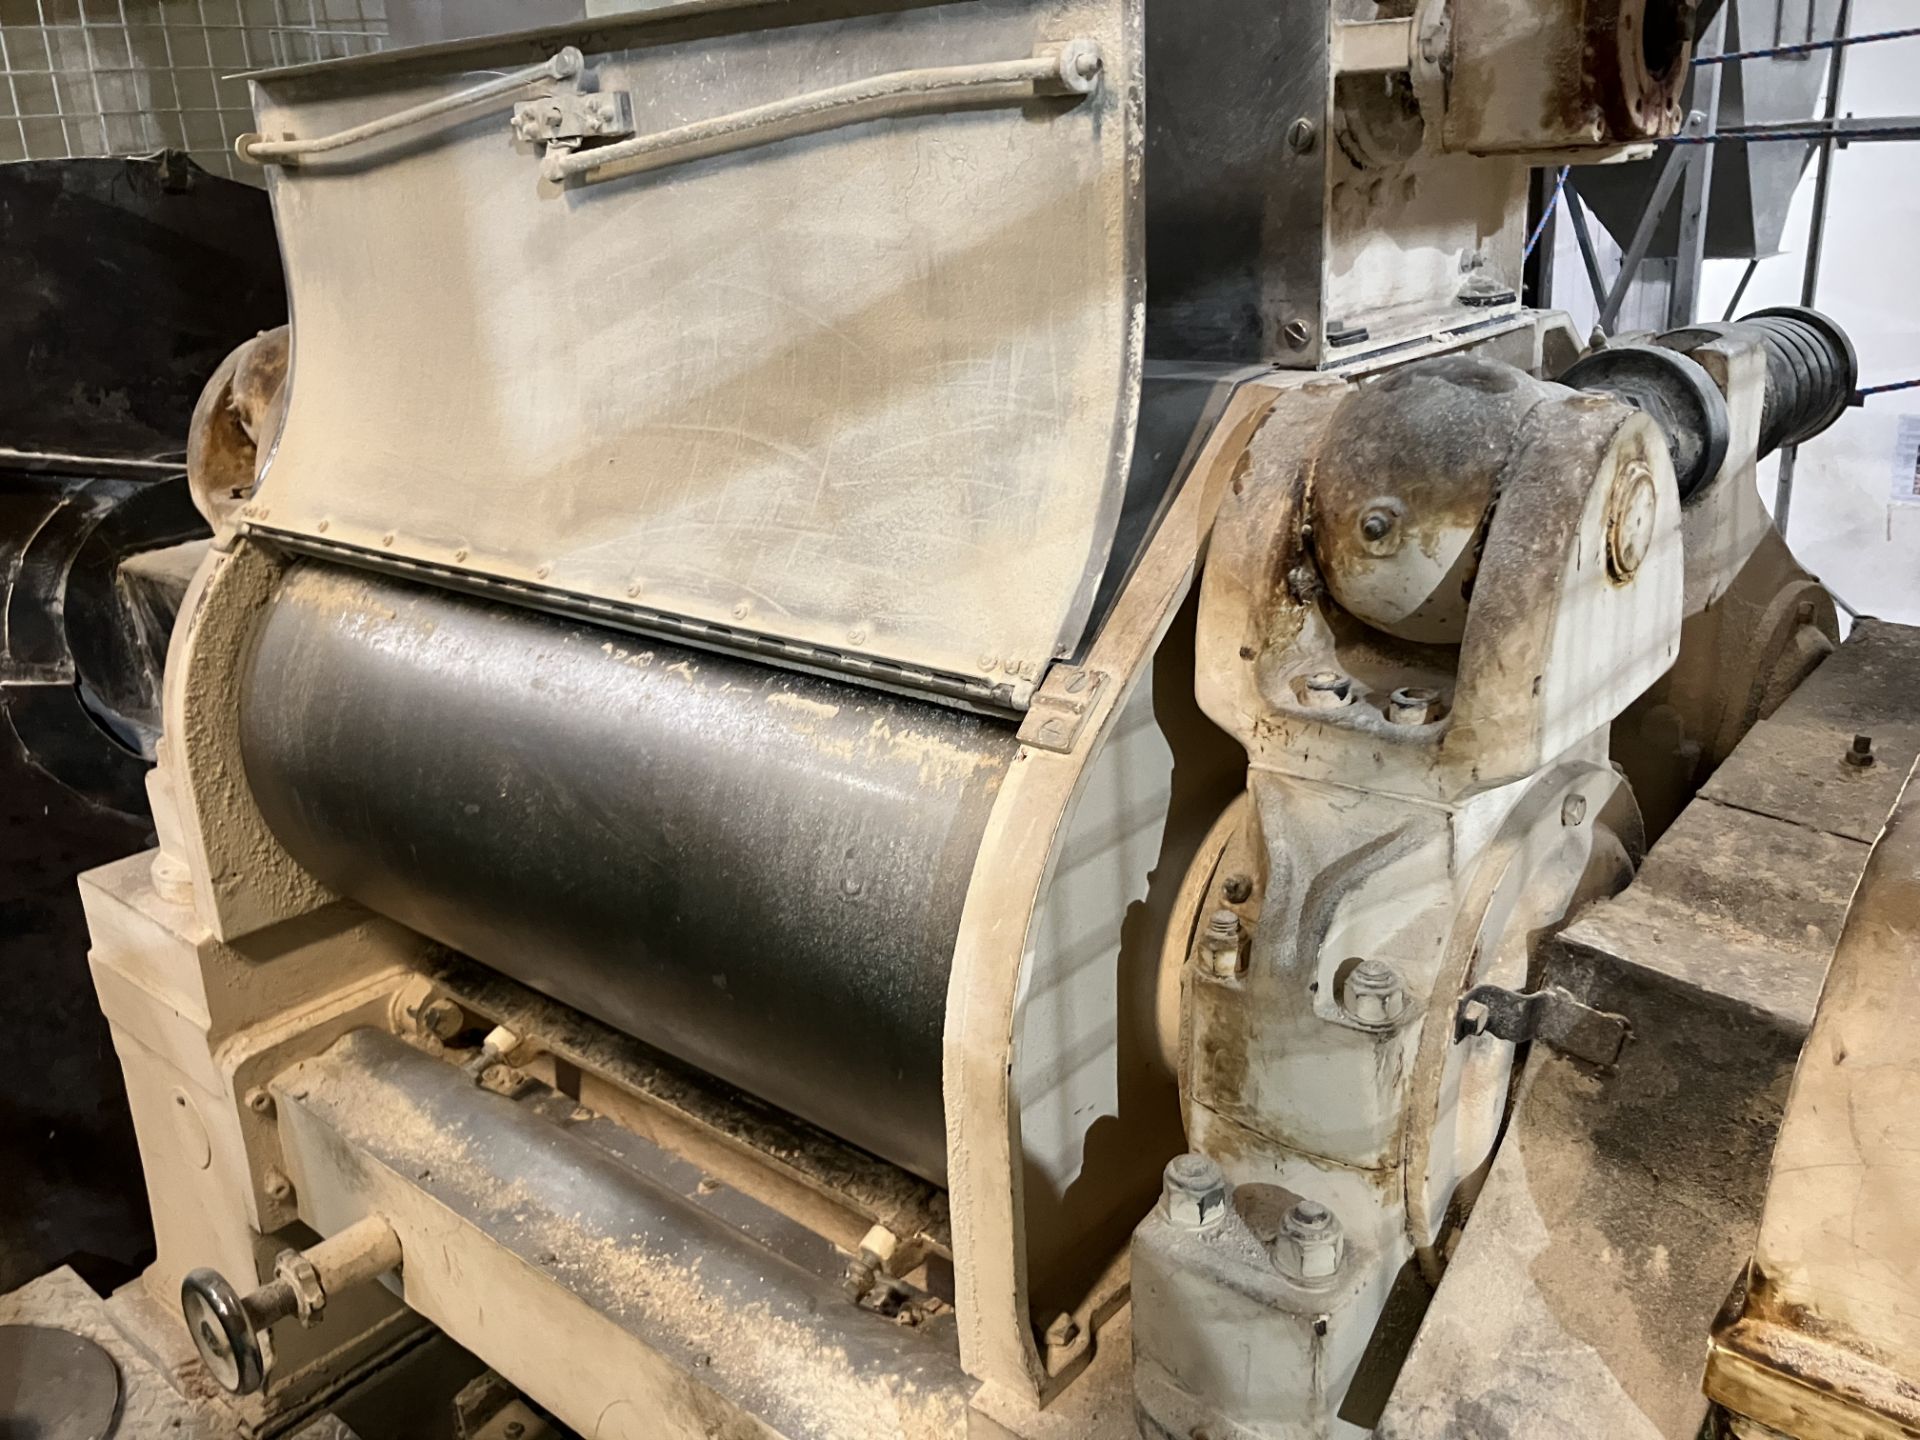 Turner FLAKING ROLLER MILL, 900mm working width, serial no. 34350, year of manufacture 1997, with - Image 3 of 7